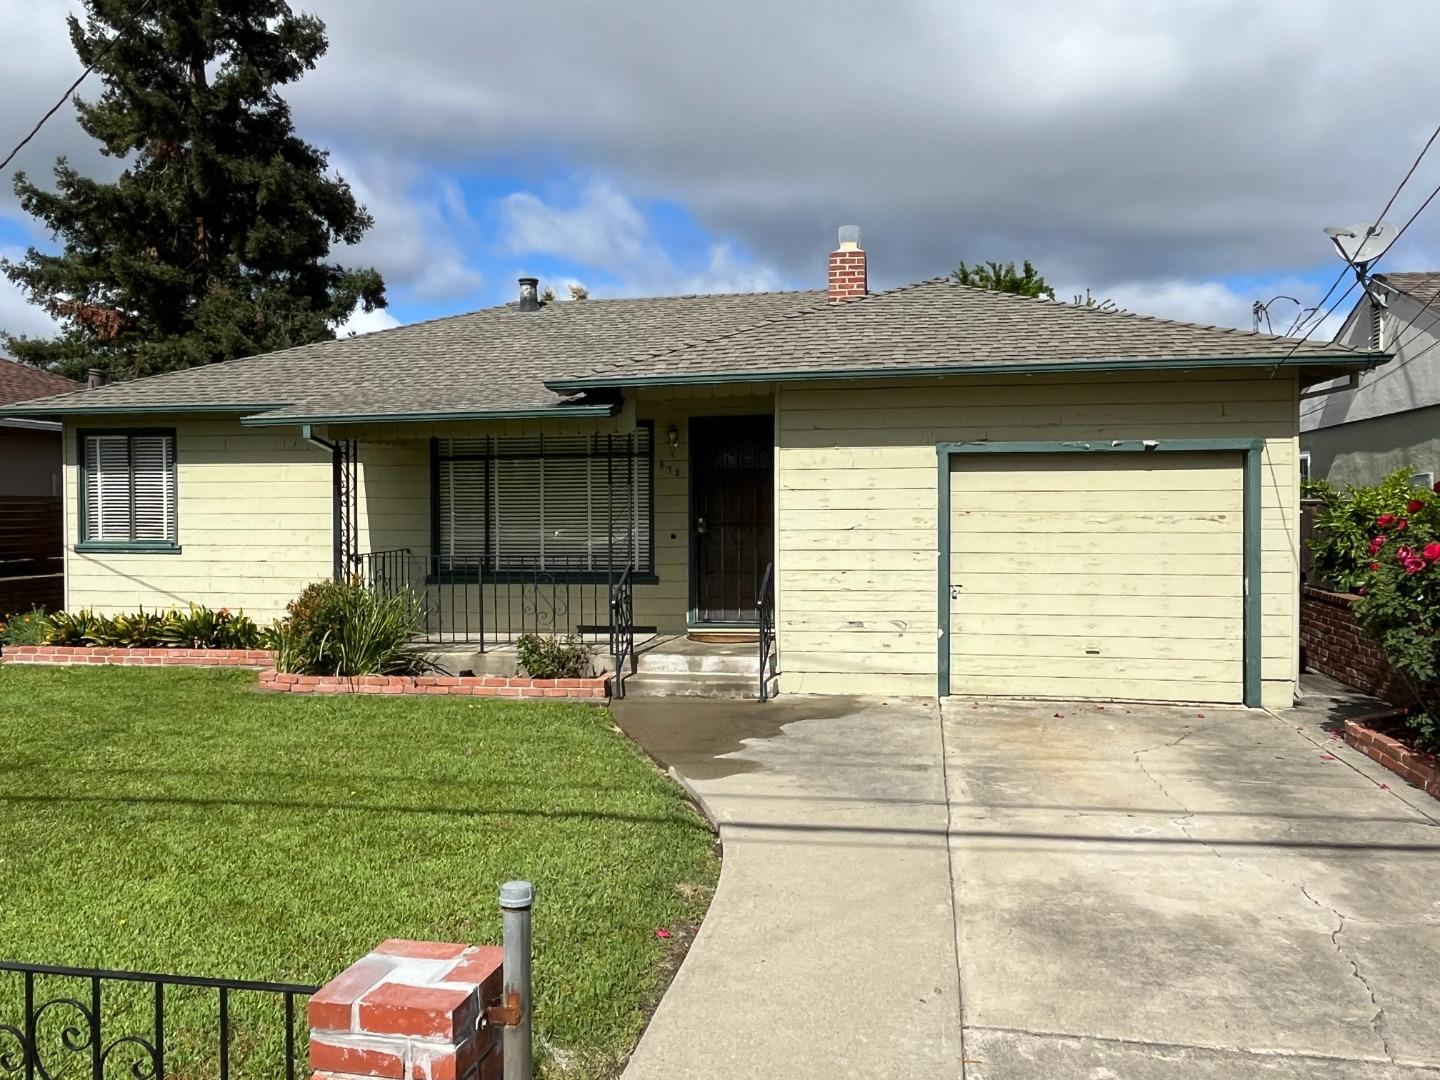 Photo of 573 Worley Ave in Sunnyvale, CA